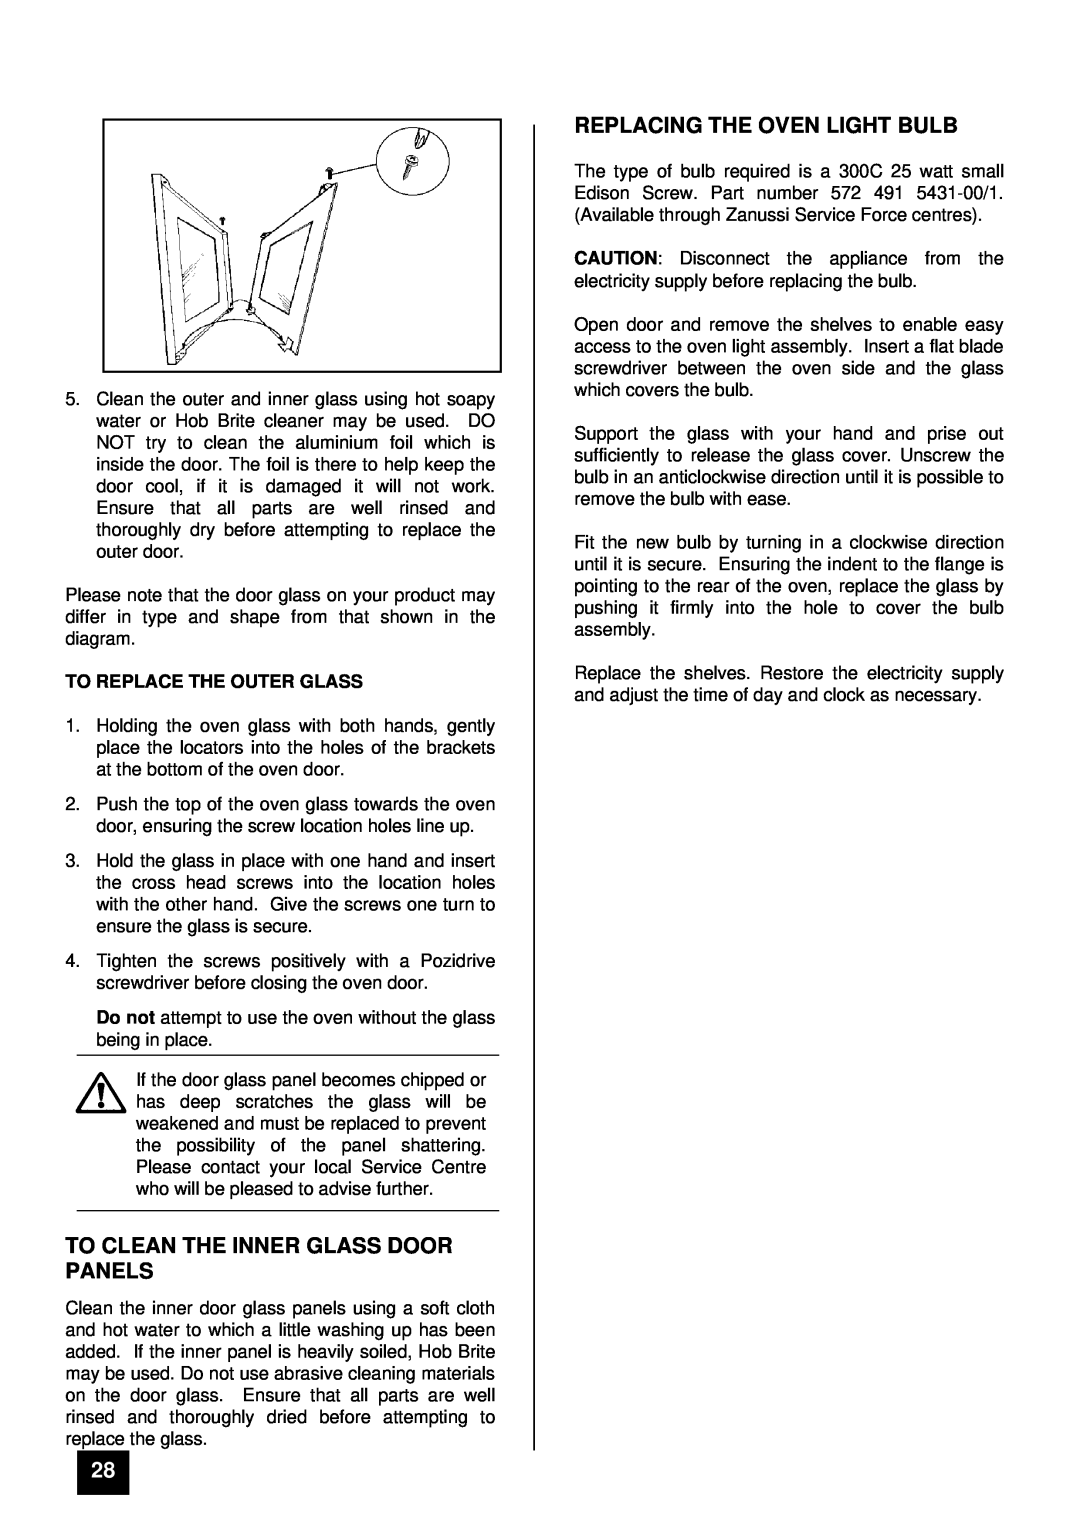 Zanussi ZCE ID manual To Clean The Inner Glass Door Panels, Replacing The Oven Light Bulb, To Replace The Outer Glass 